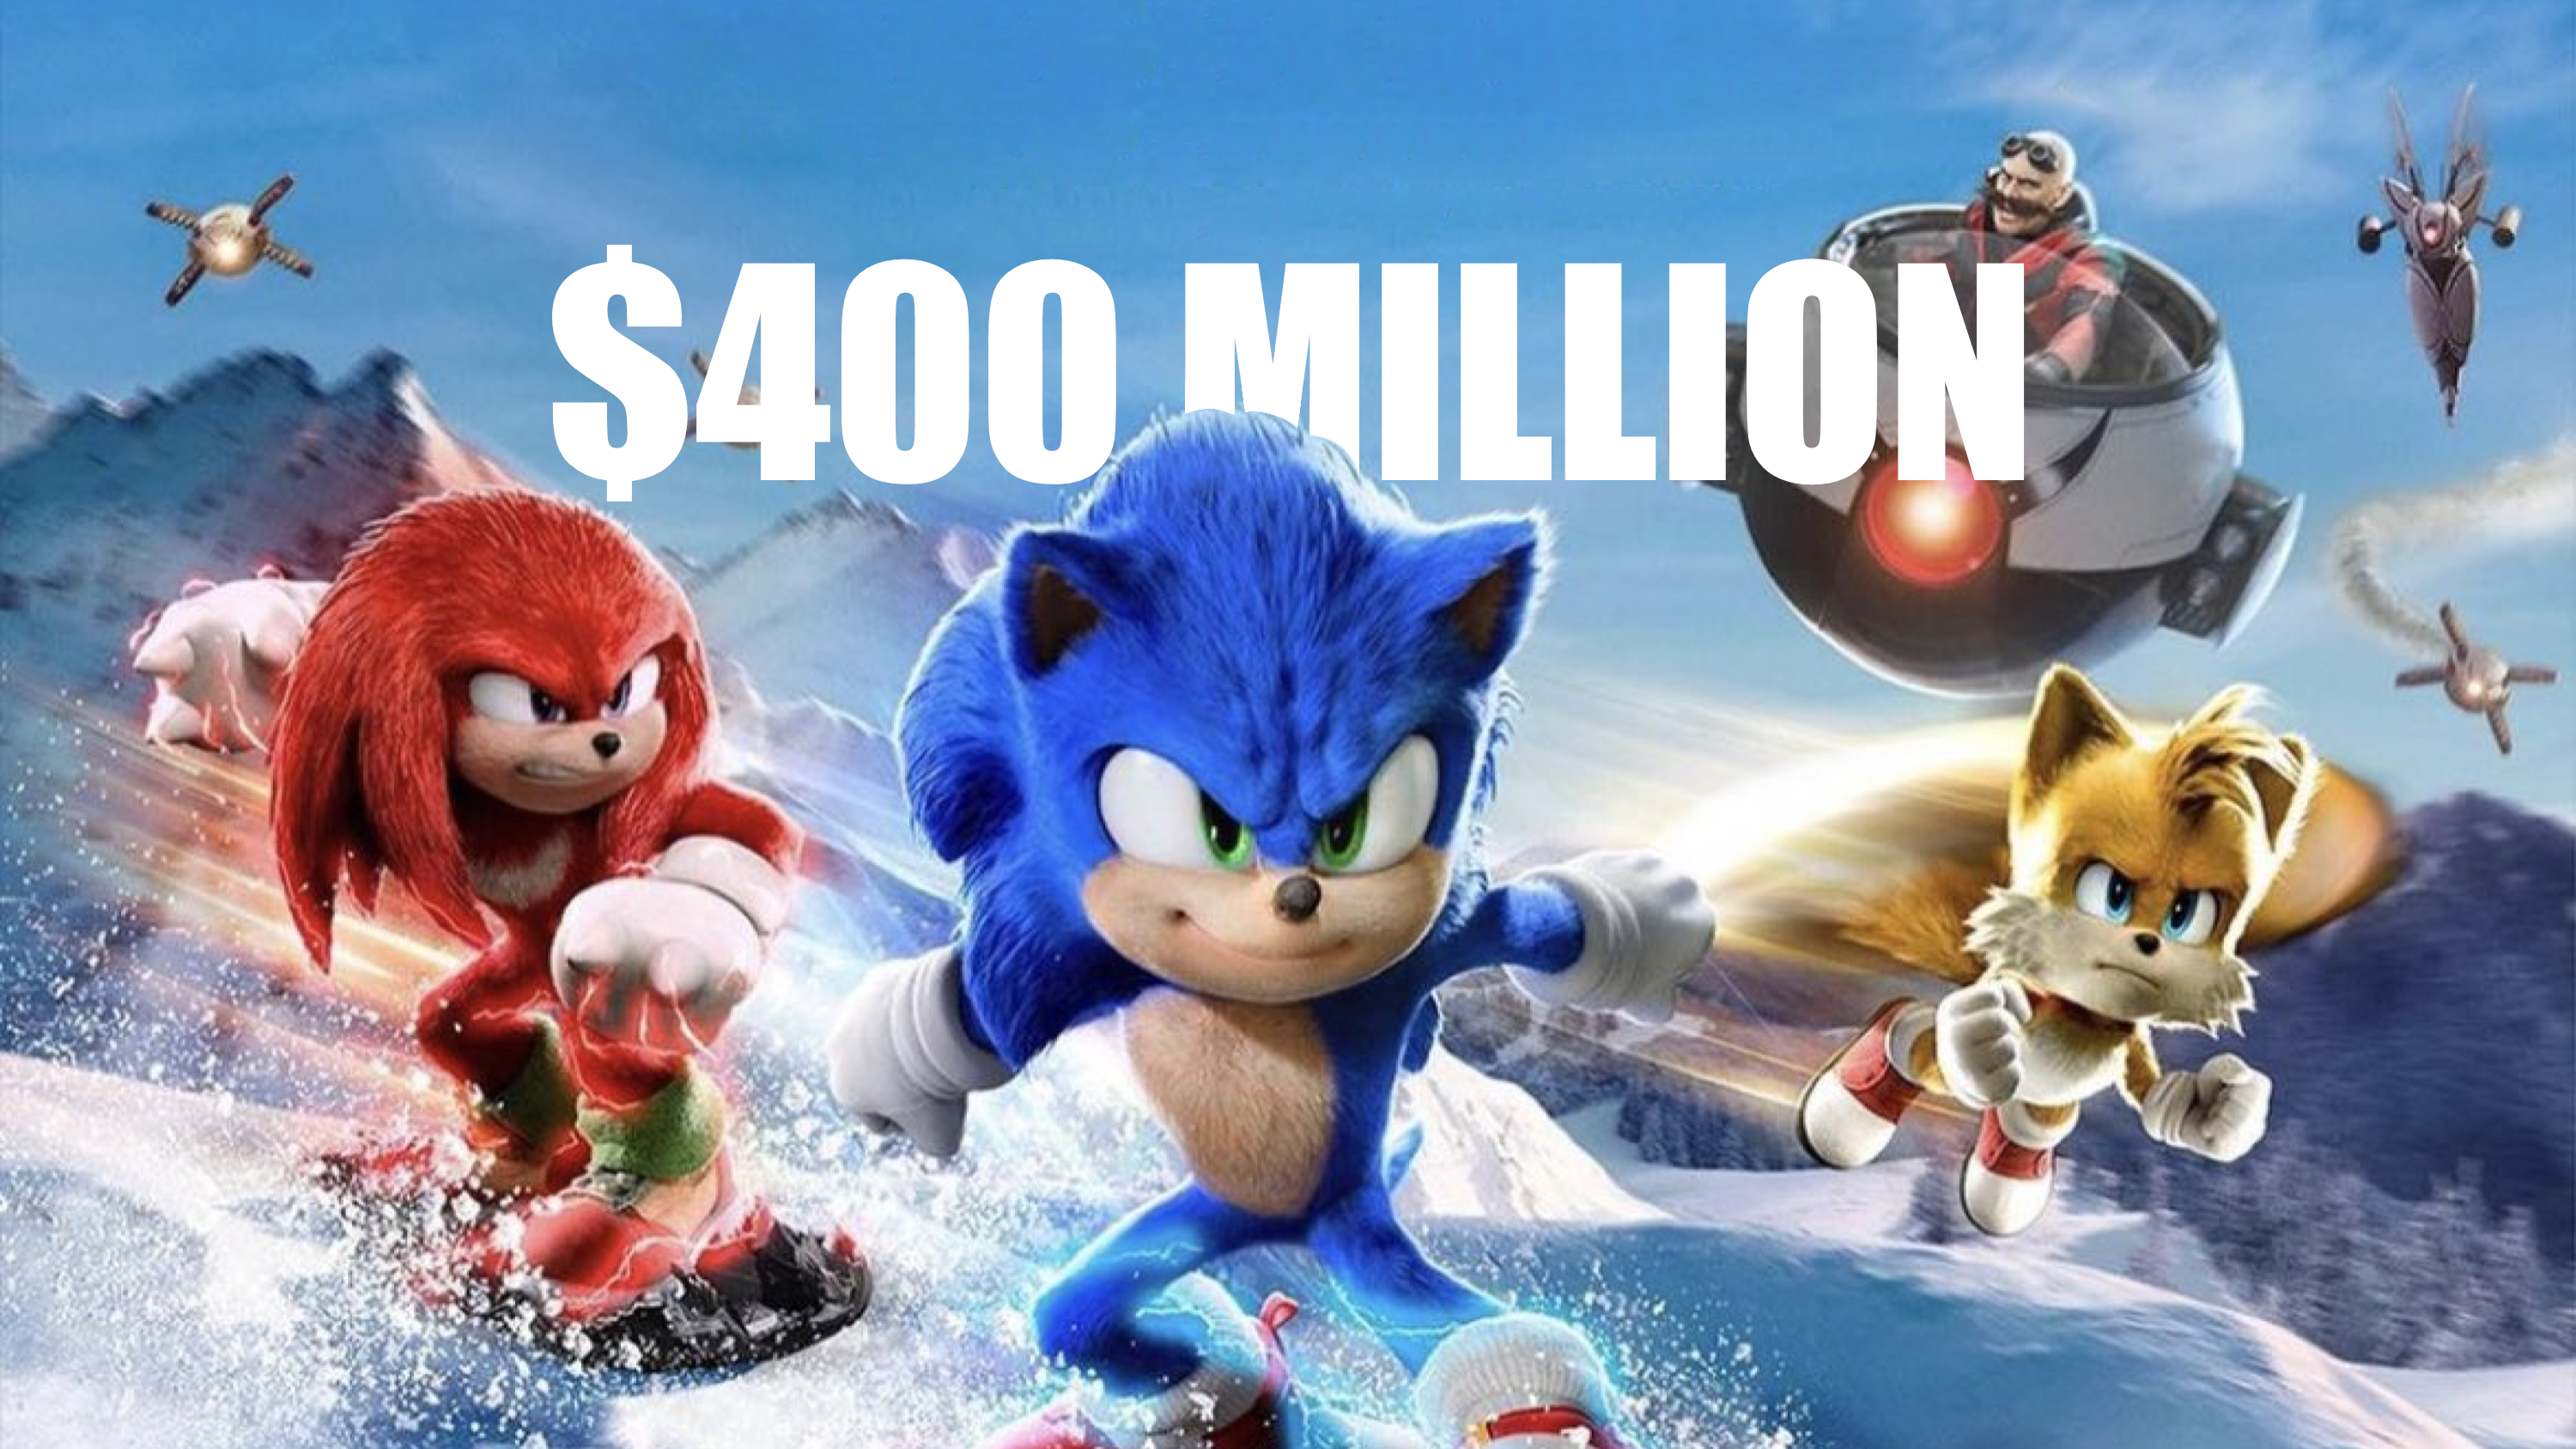 Sonic the Hedgehog 2 Speeds to No. 1 at Box Office with $71 Million